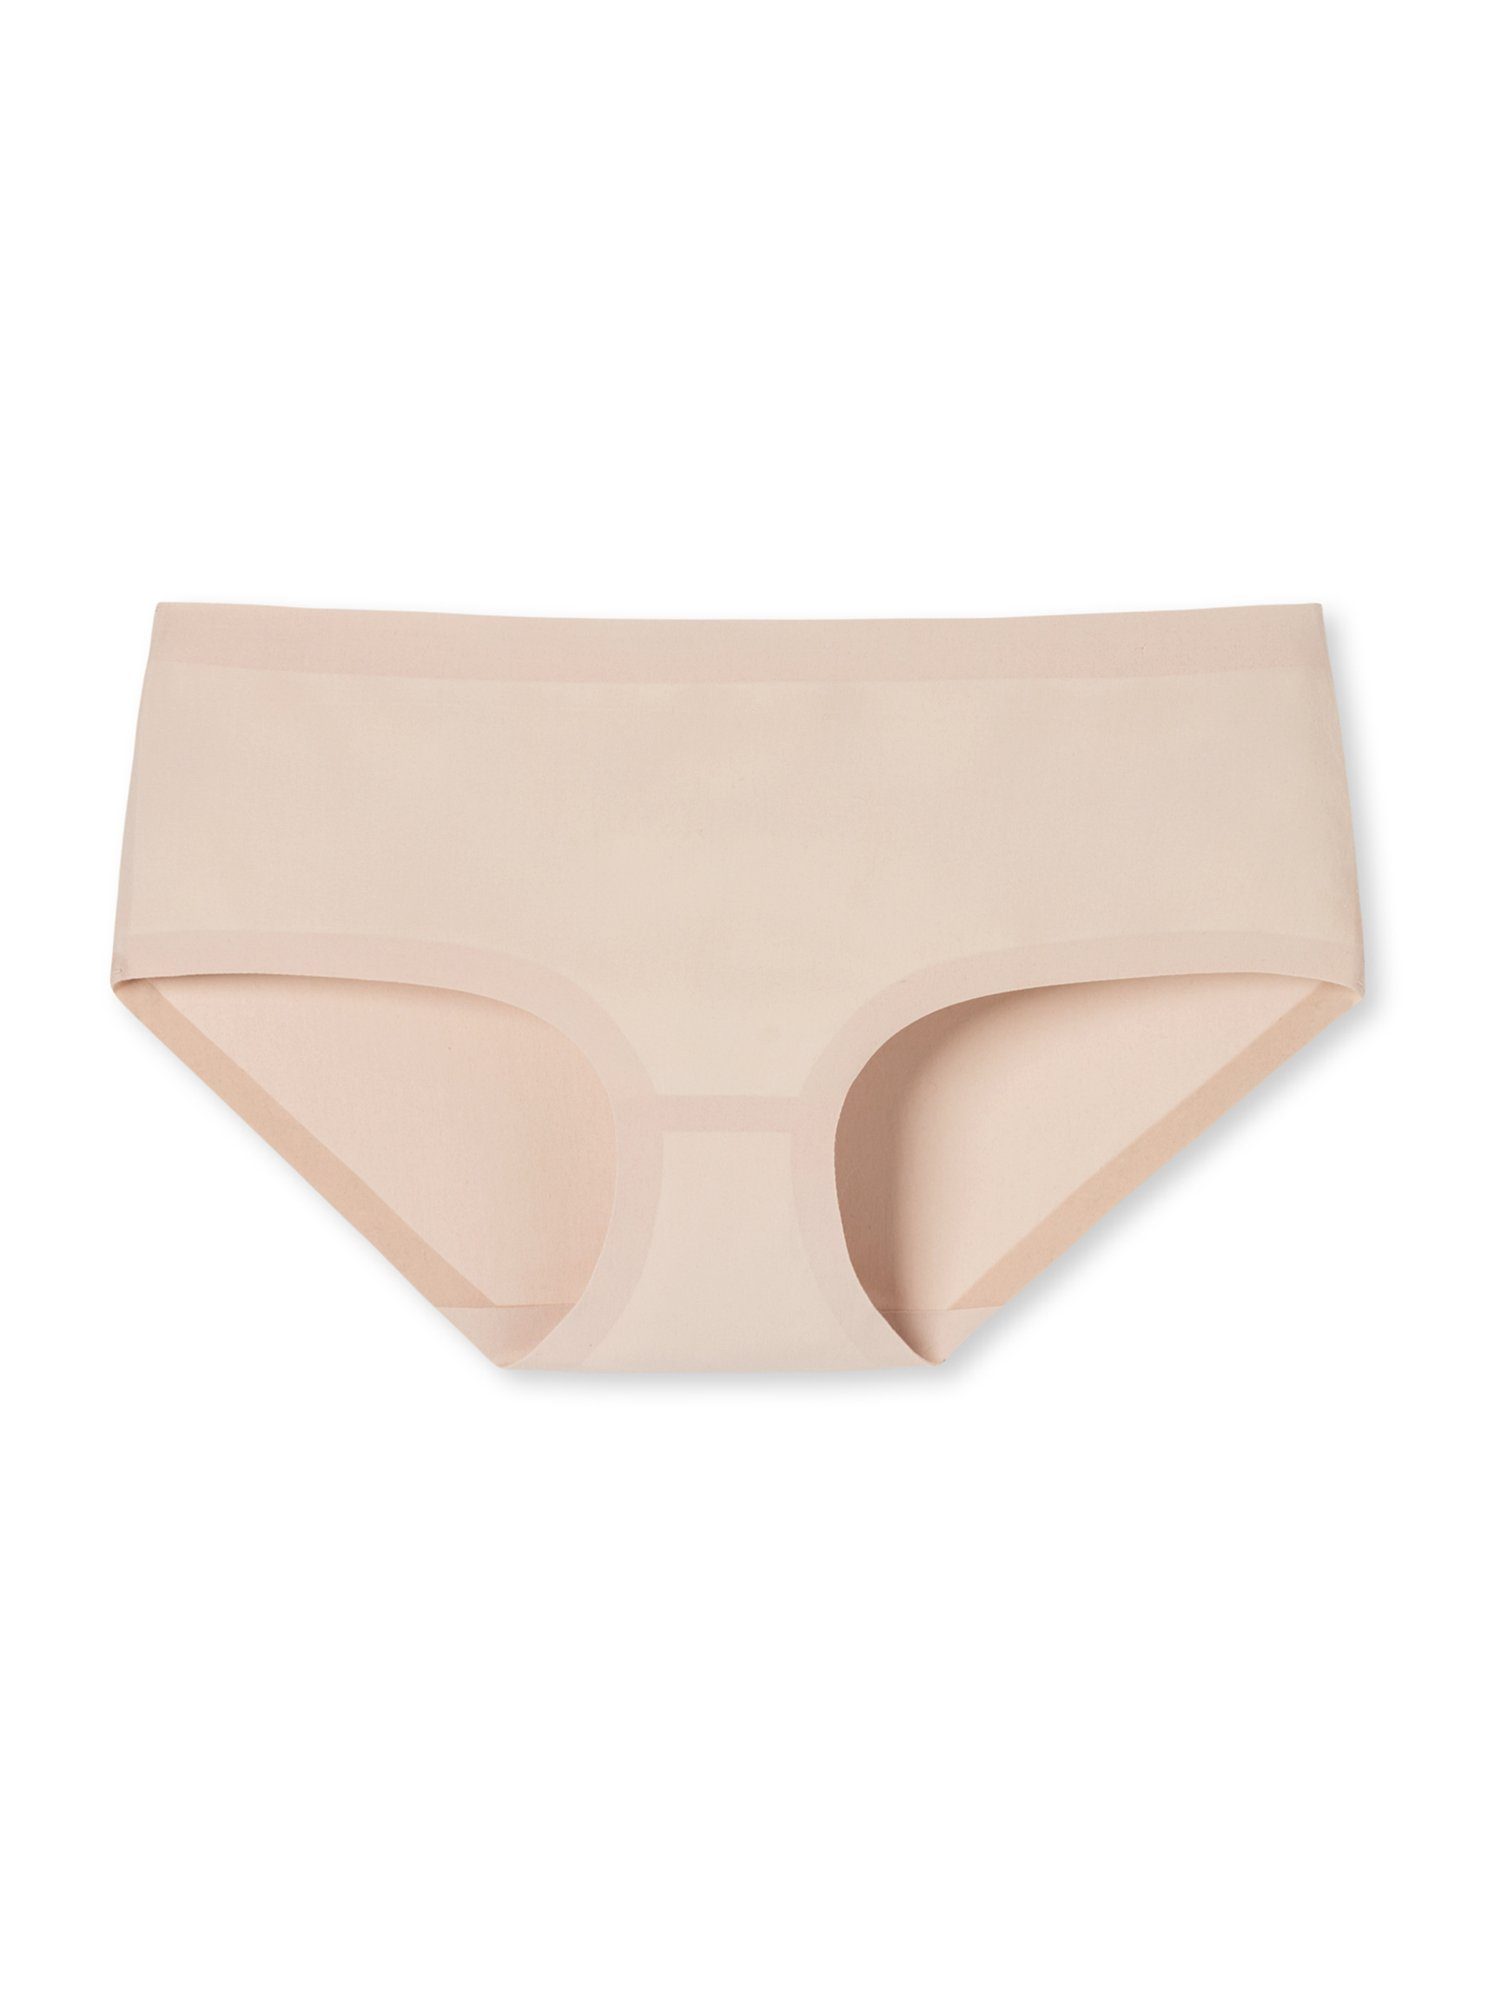 Invisible Schiesser Cotton Panty sand (1-St)